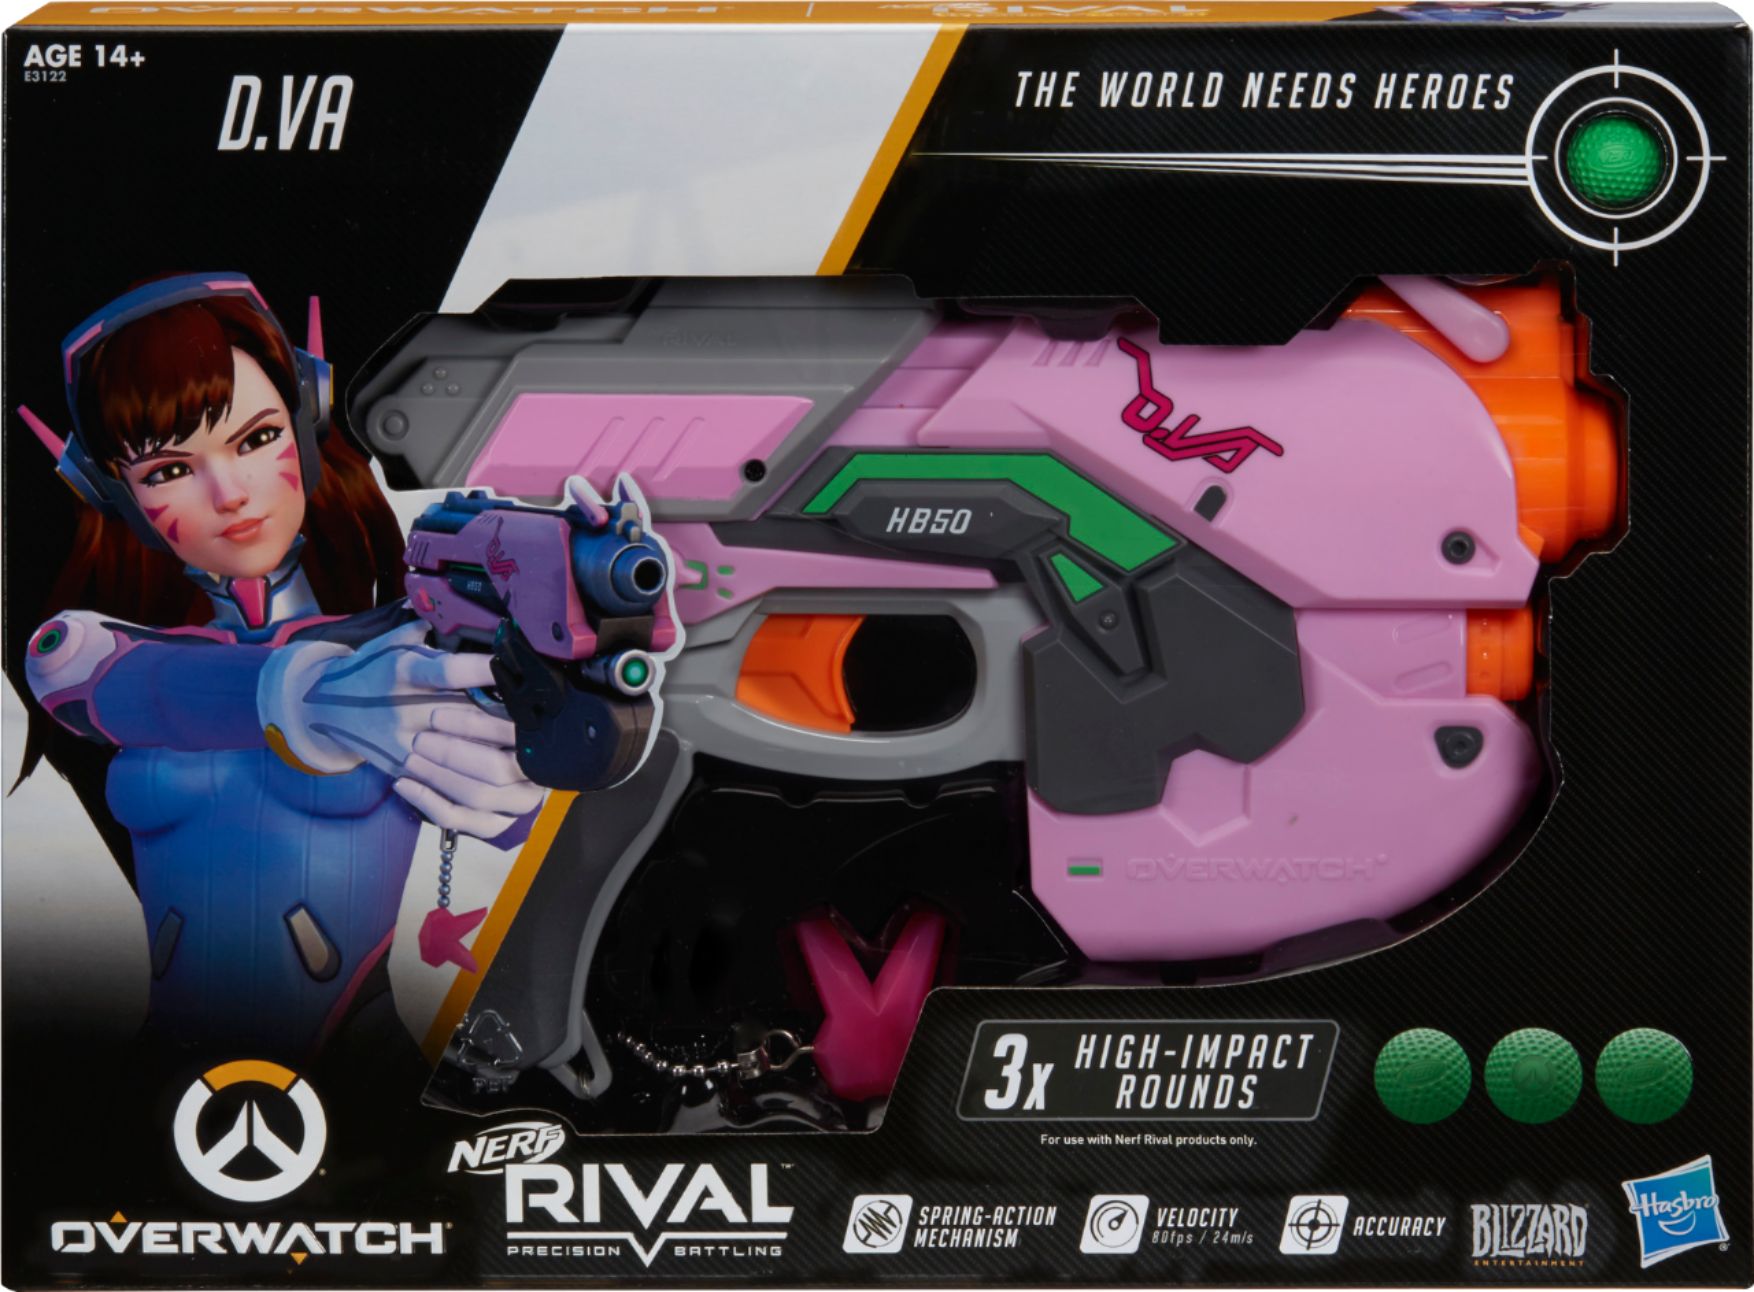 NERF Overwatch D.va Rival Blaster With 3 30x High Impact Rounds for sale online 